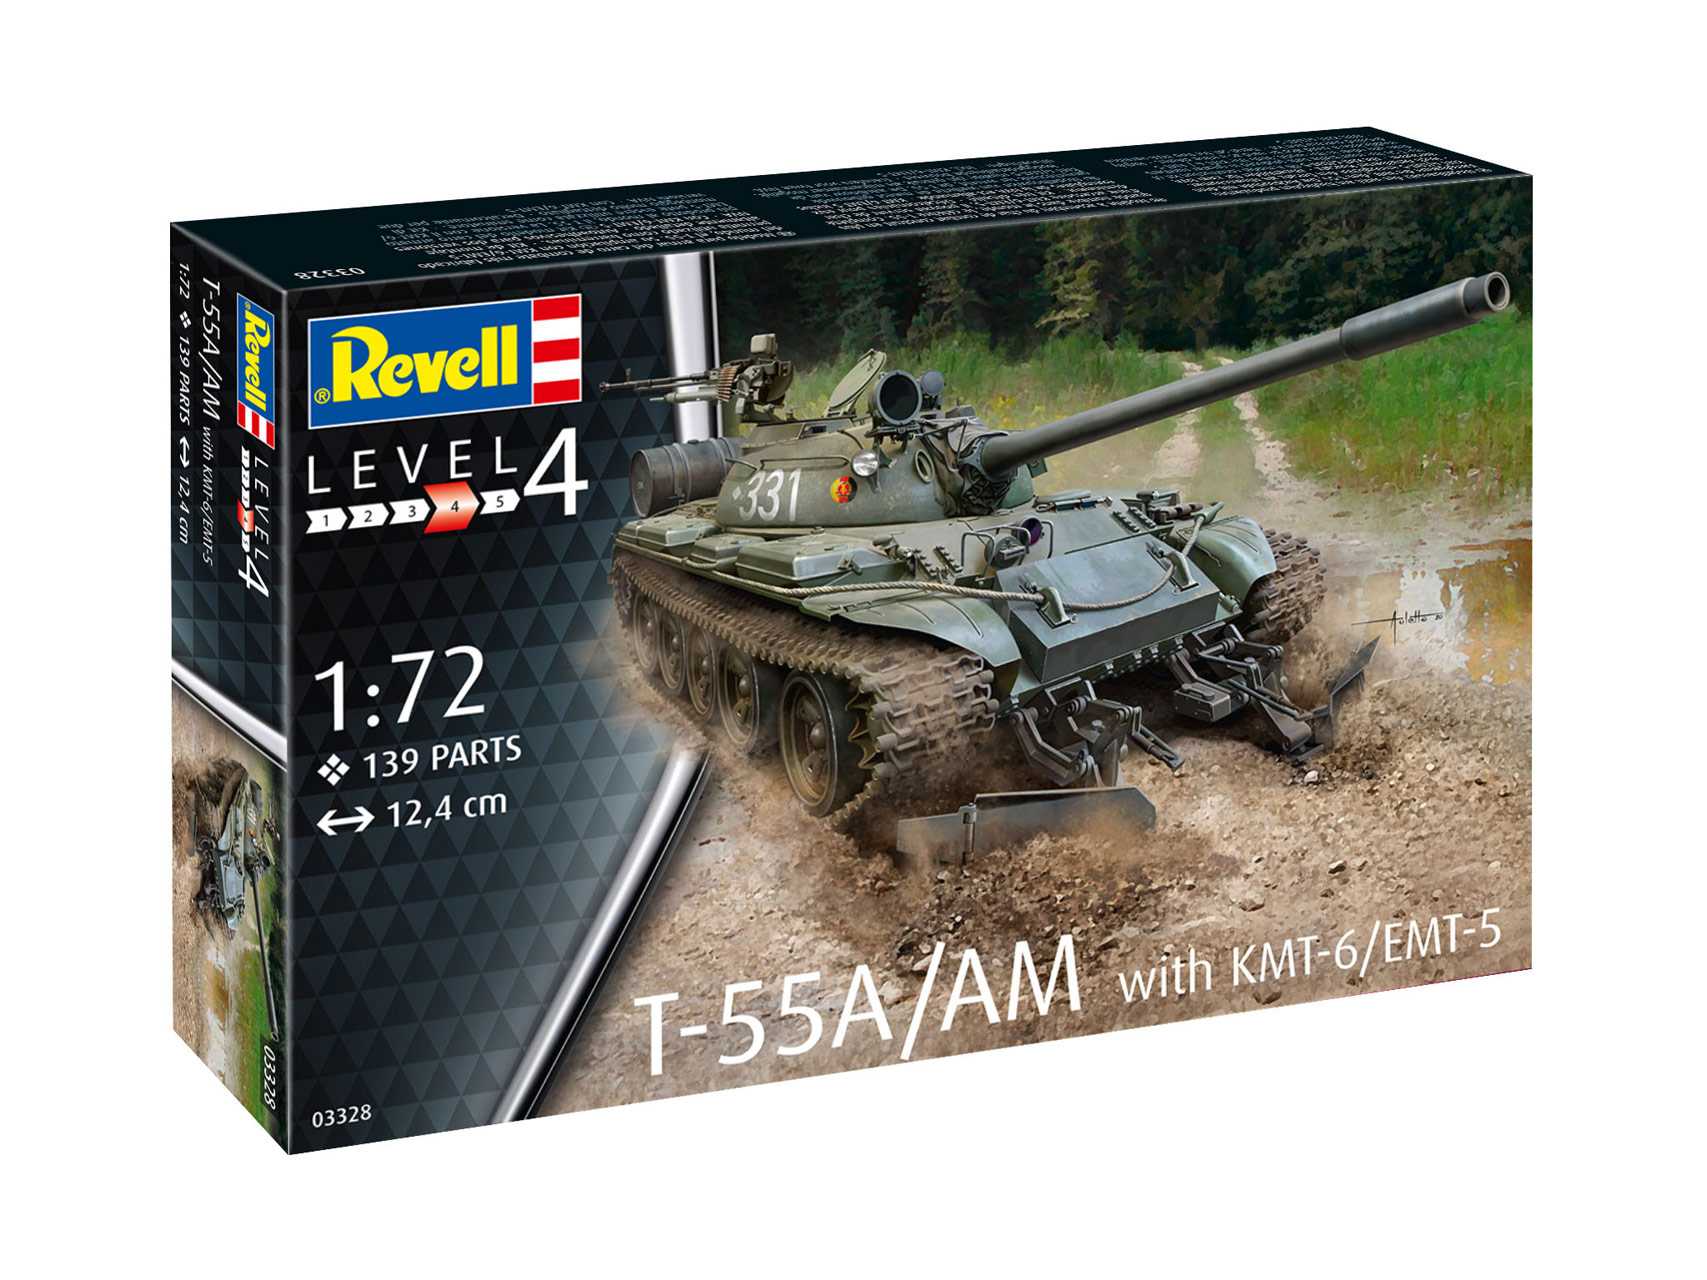 Revell 03328 - T-55A/AM with KMT-6/EMT-5 (1:72)